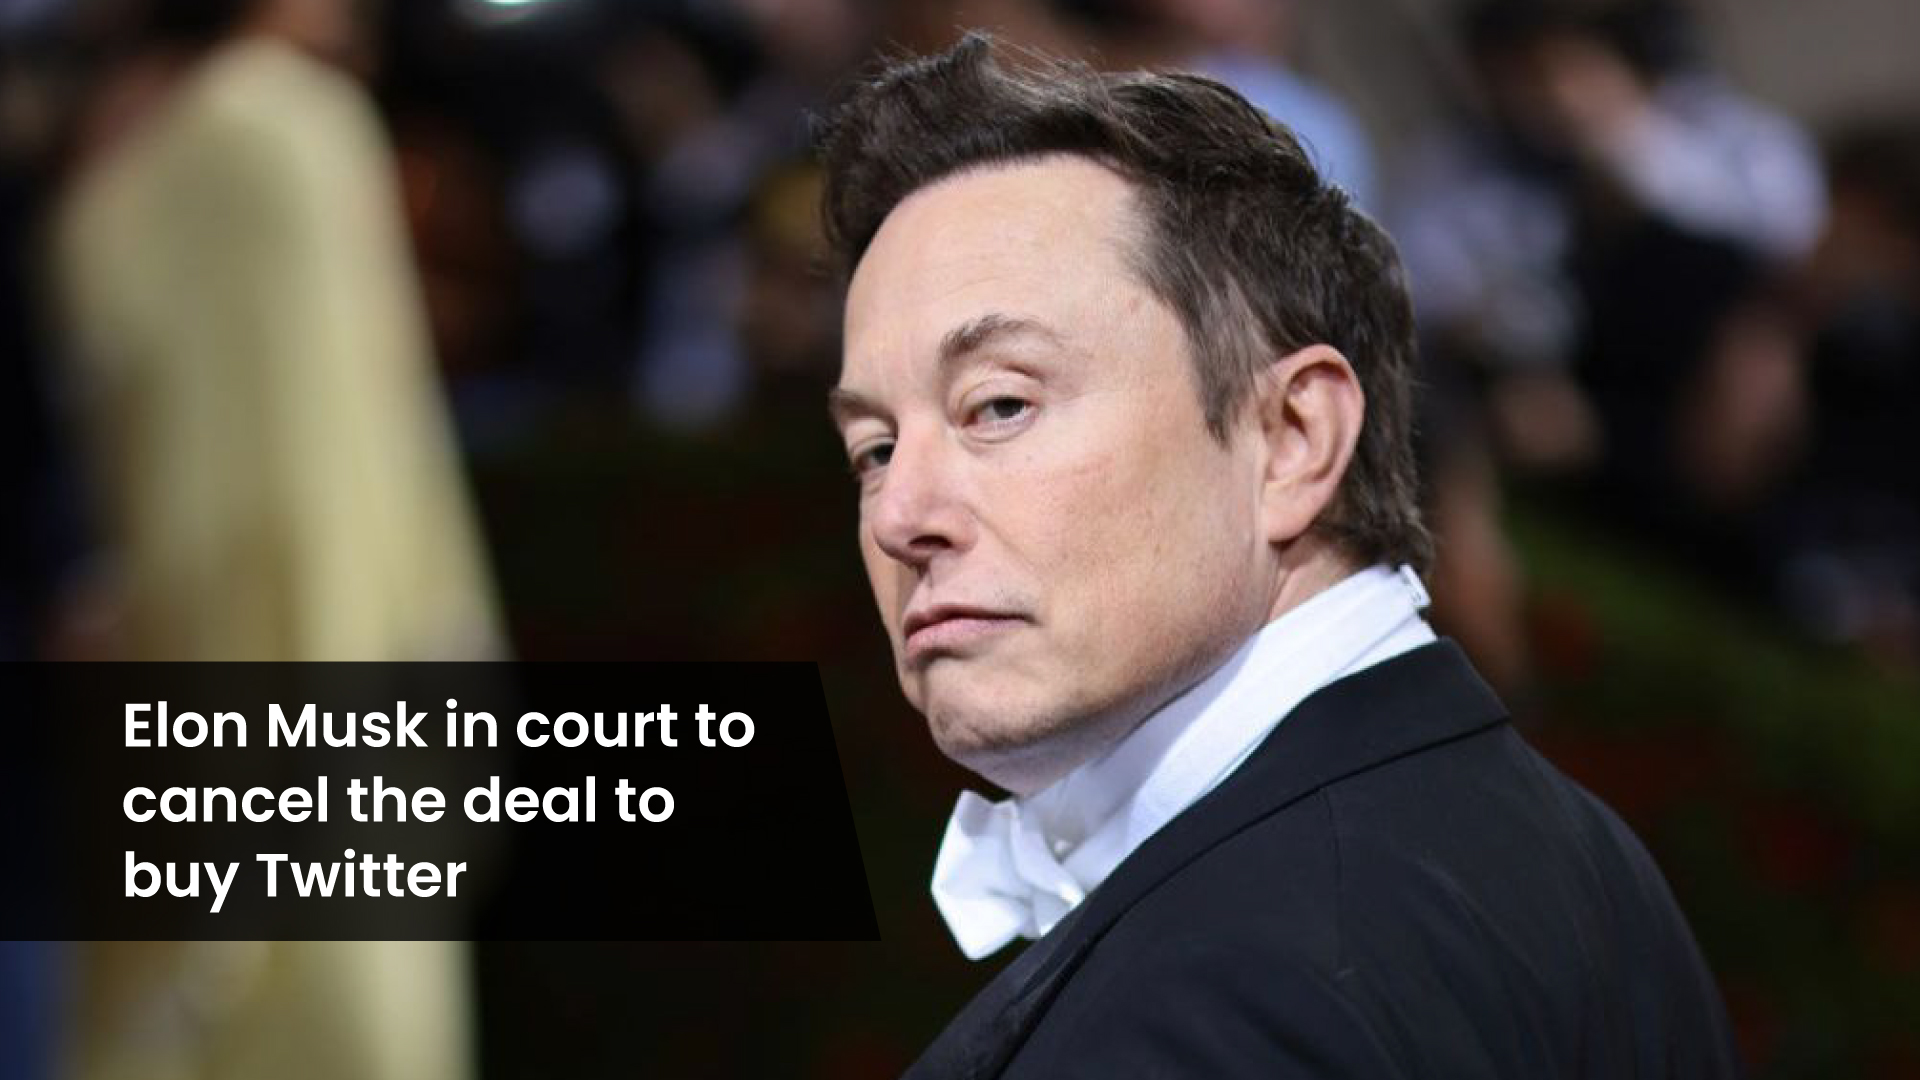 Elon Musk in court to cancel the deal to buy Twitter